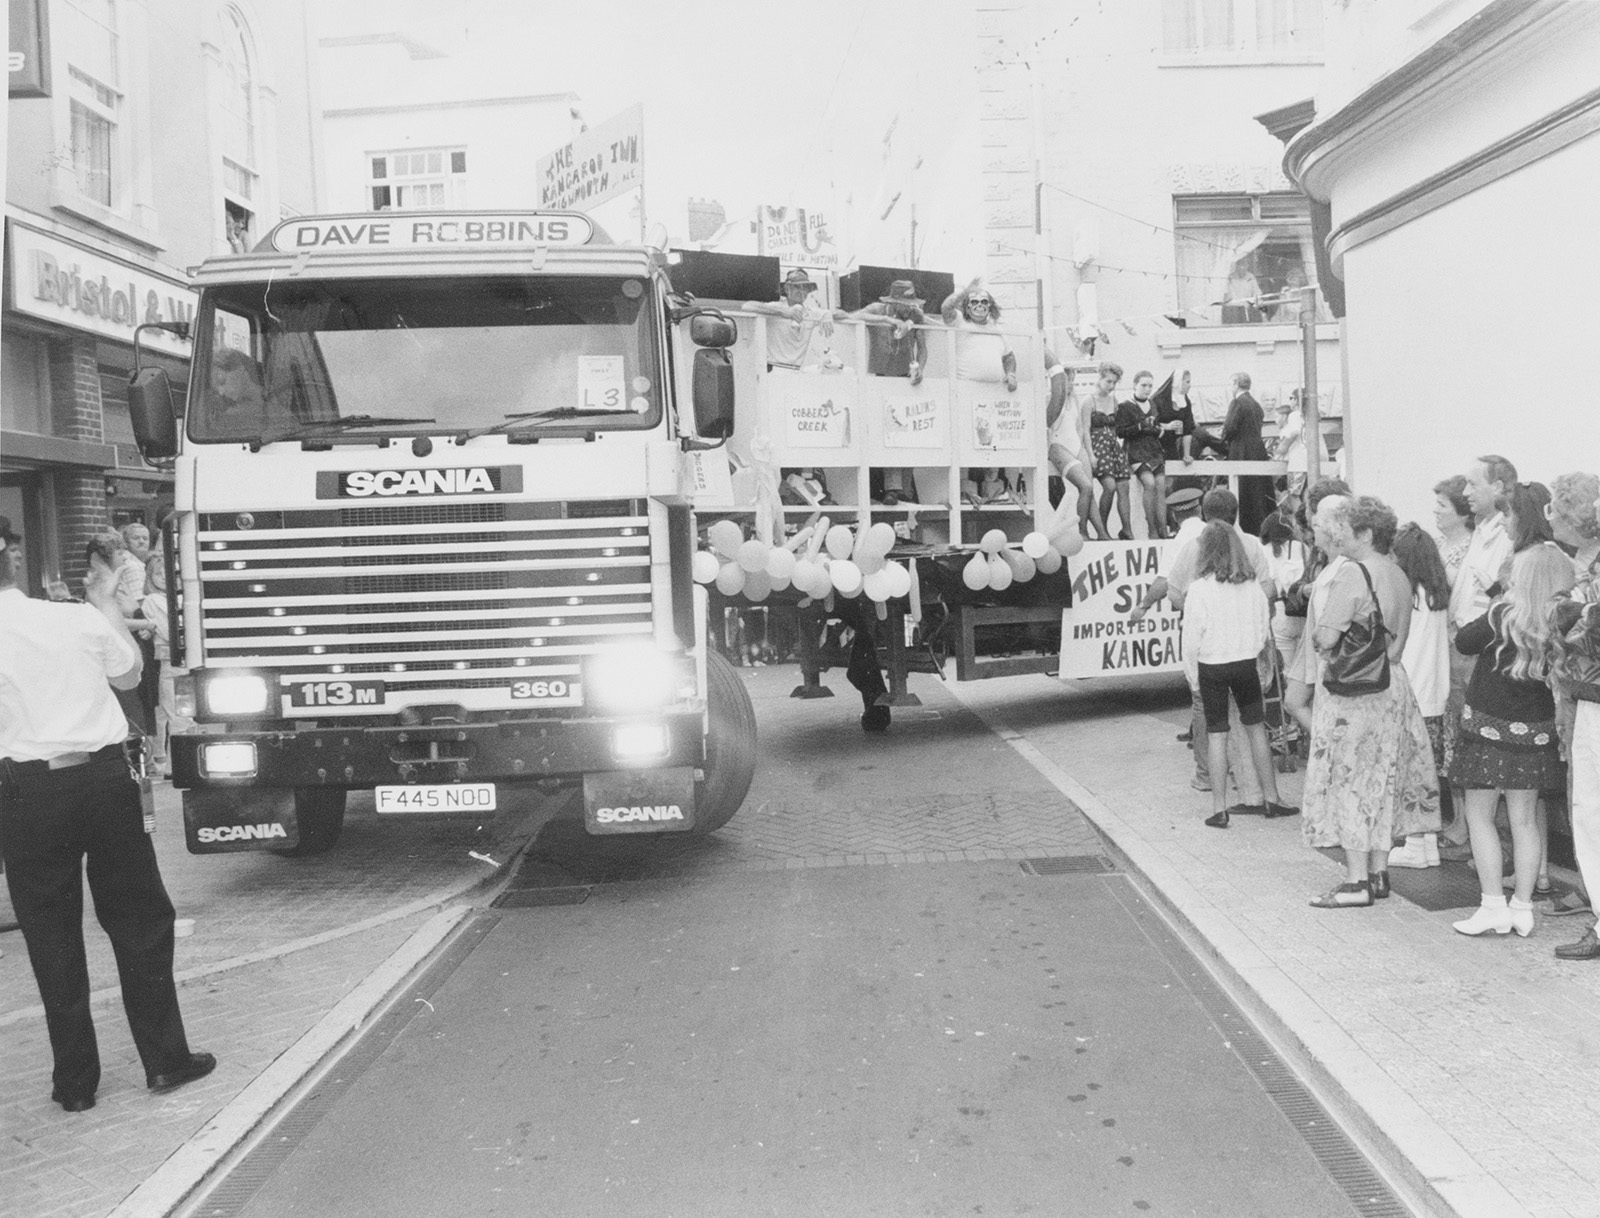 Photograph of the Teignmouth Carnival 83/84